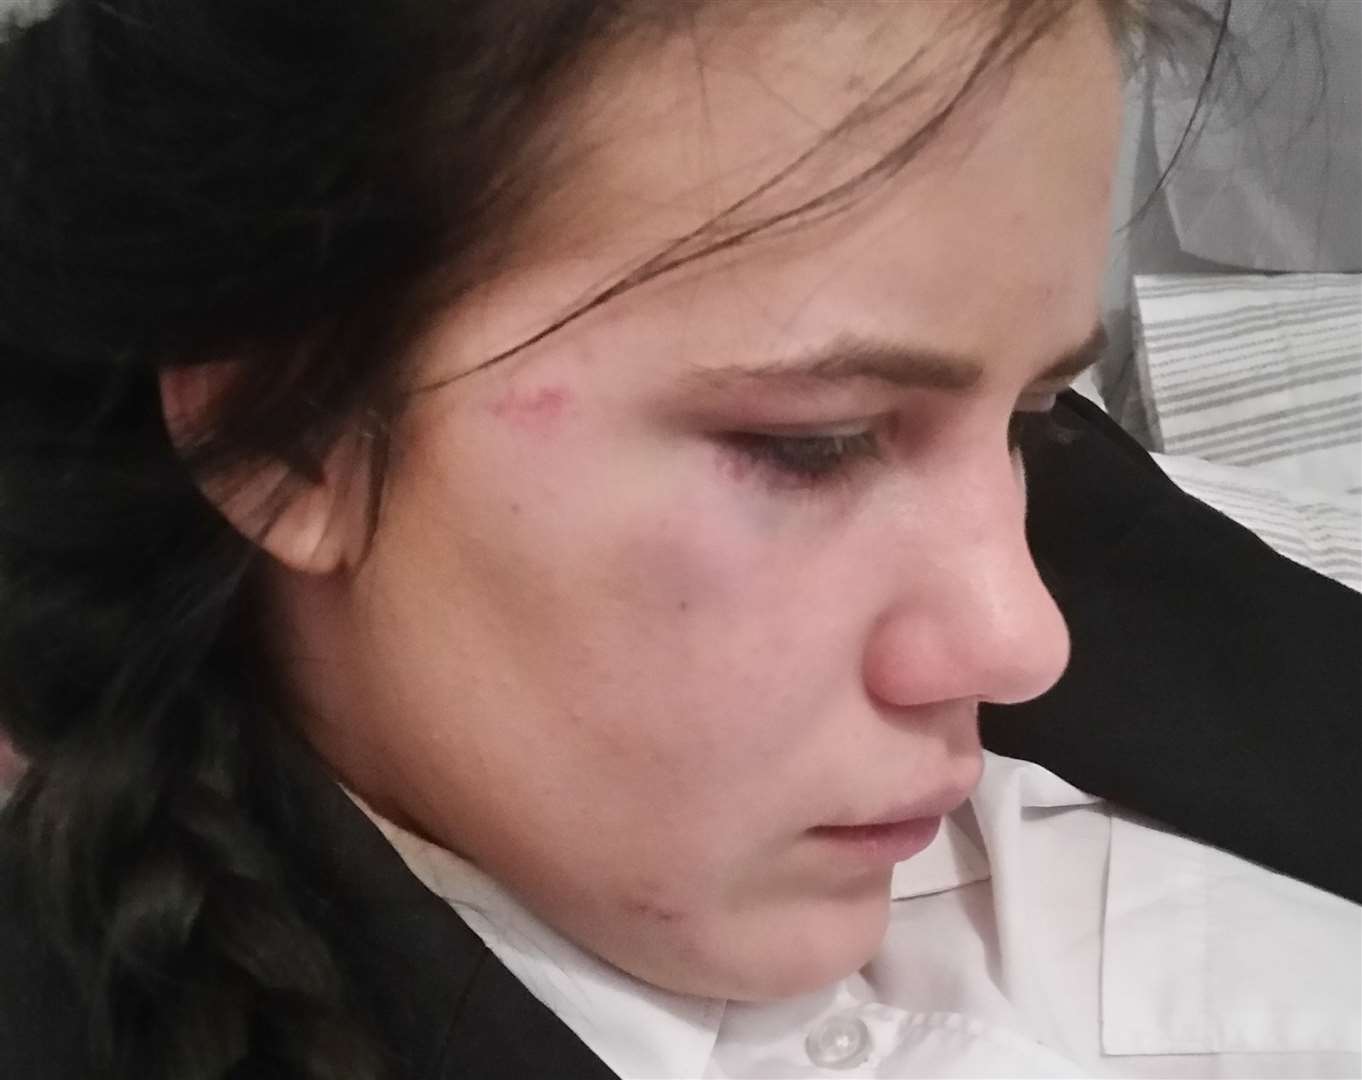 Madison Coggin needed hospital treatment after being set upon my bullies (10428151)